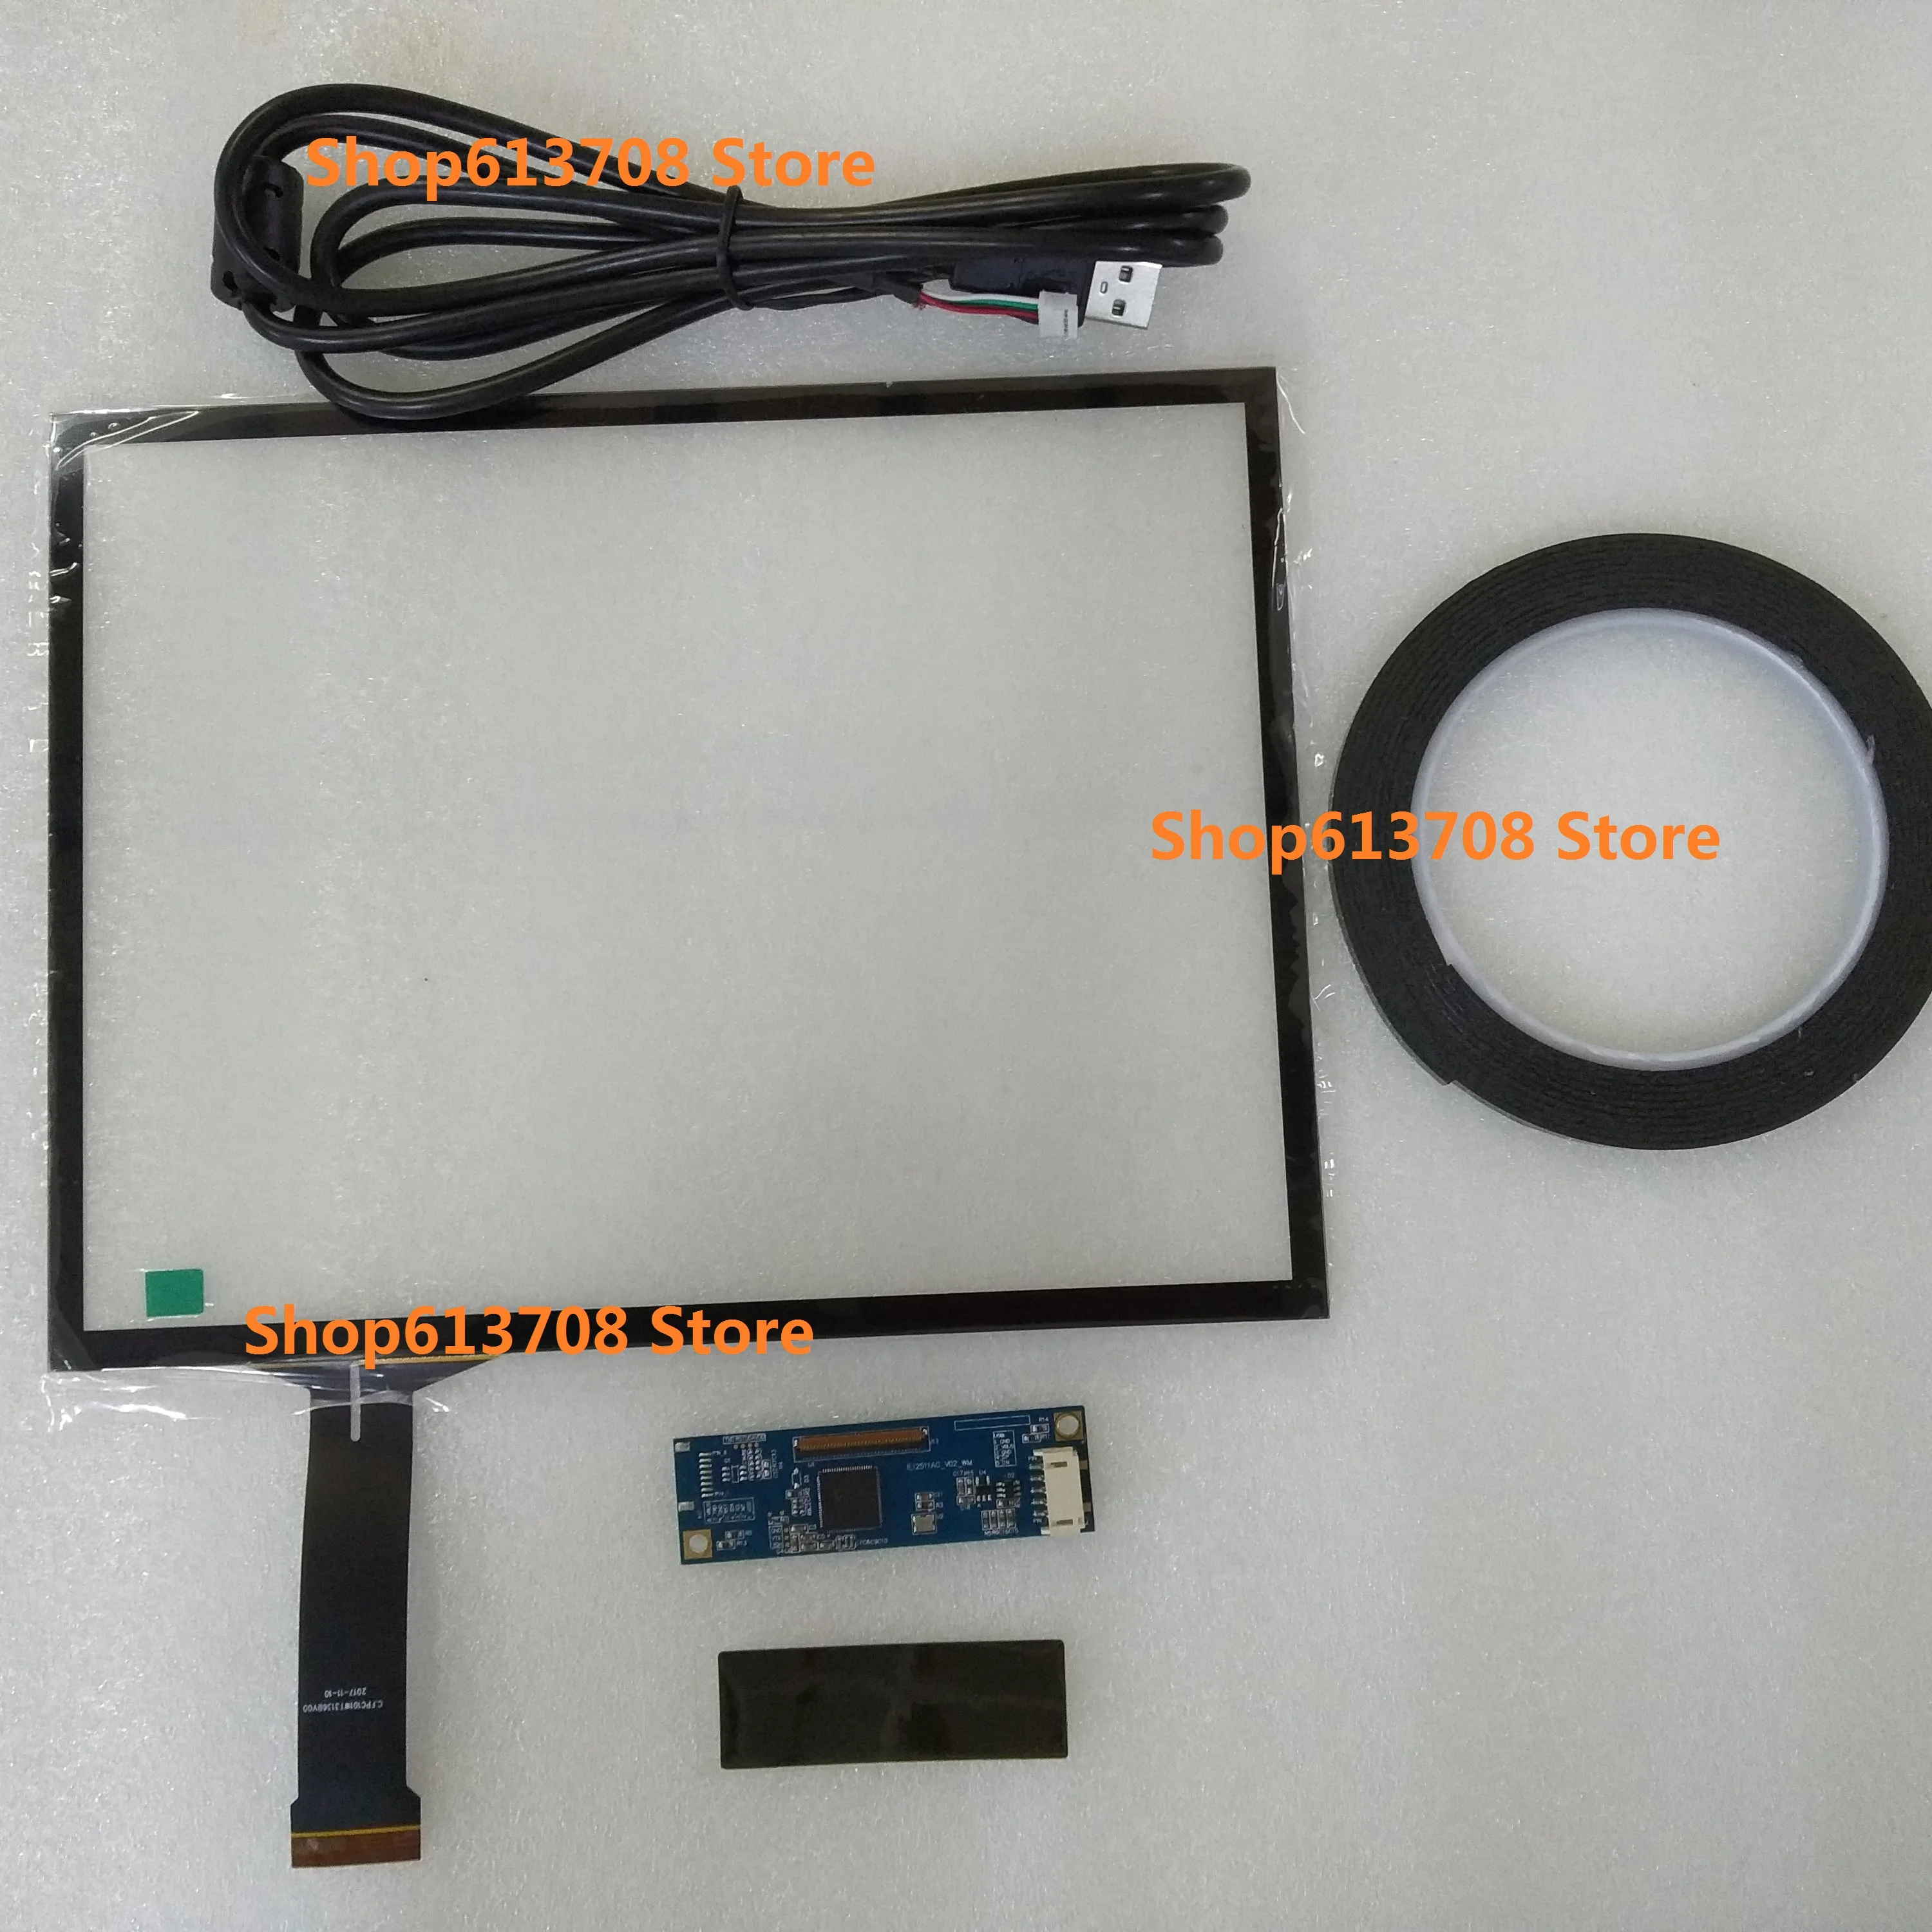 

for 10.4" Screen 4:3 LCD display Universal Capacitive Touch Panel Controller DIY